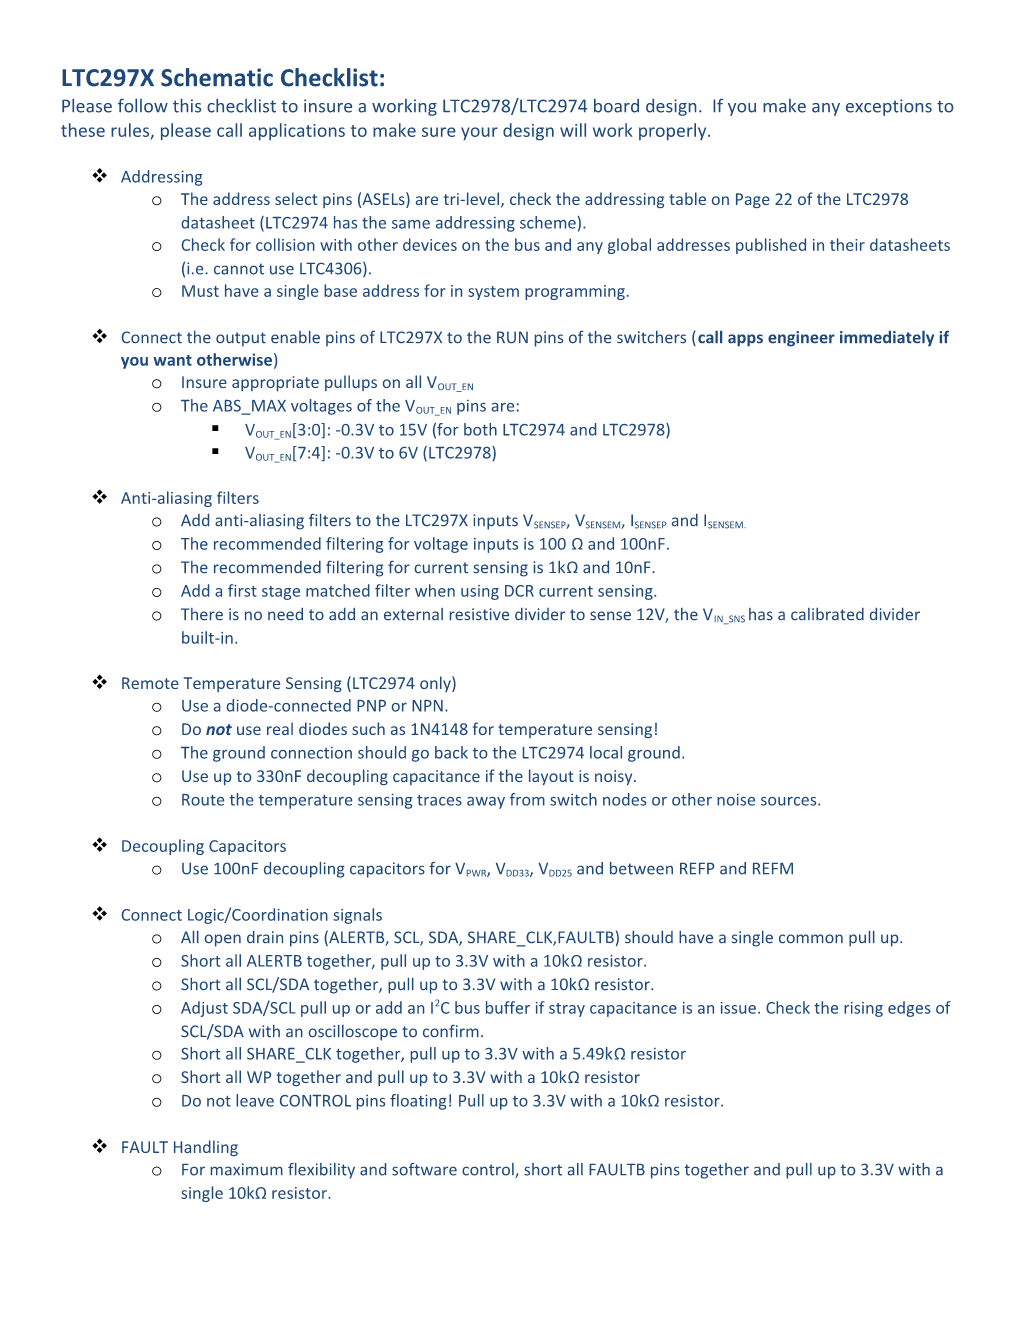 Please Follow This Checklist to Insure a Working LTC2978/LTC2974 Board Design. If You Make